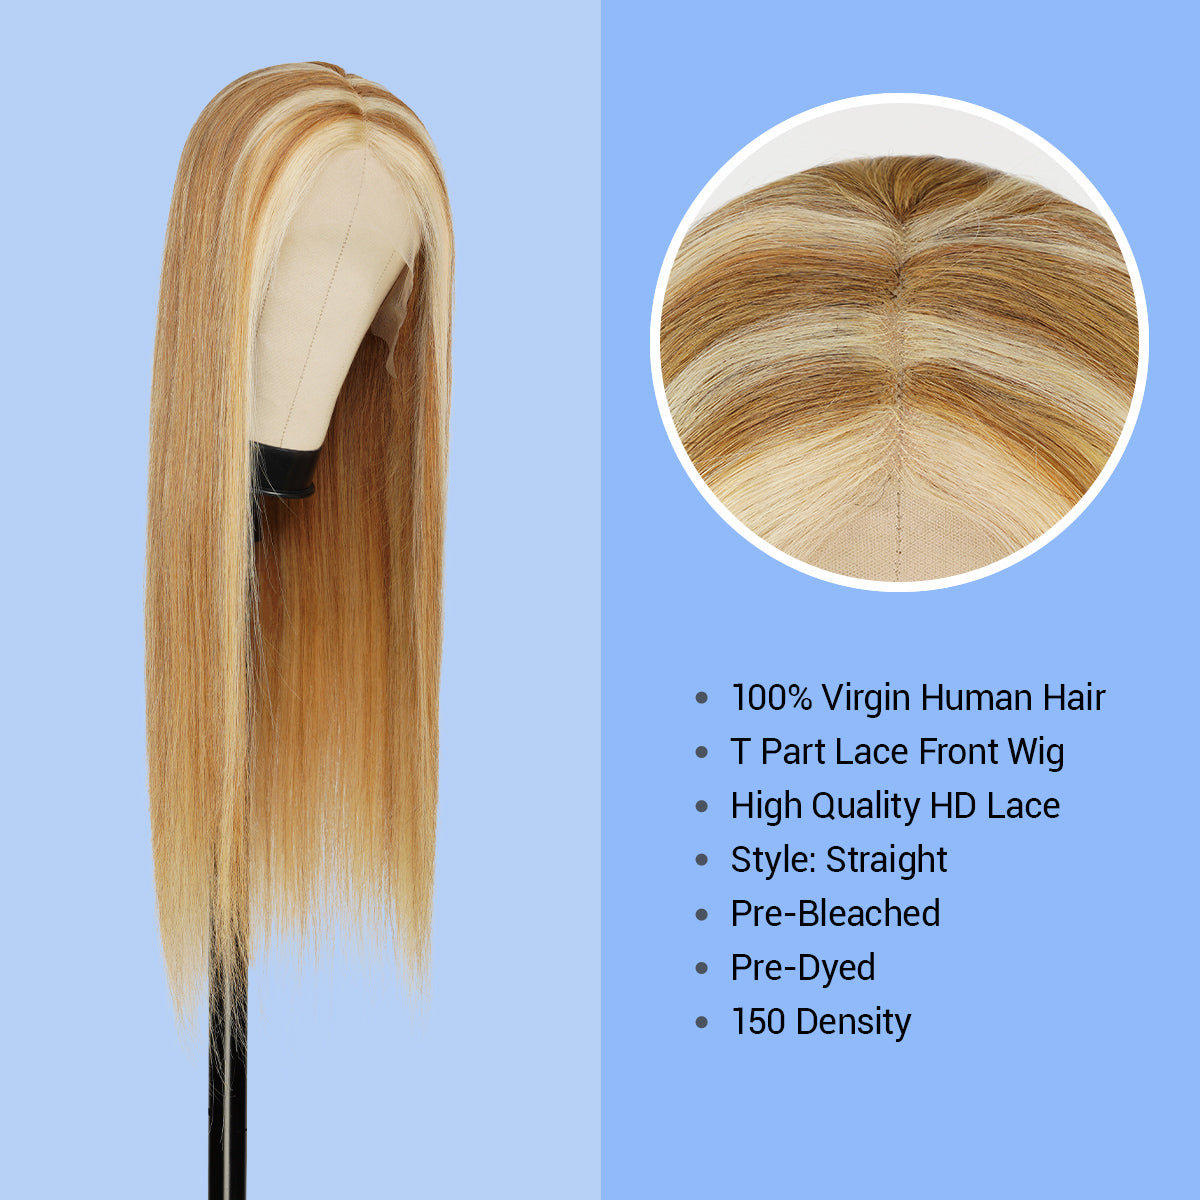 Human Hair, Lace Wig, T part, Deep part, Center Part, Middle Part, Long and Full, Natural Hairline, Straight, layered straight, HD Lace, Blonde, 613, Chunky Highlight, 27/613, Fancy Color, Pre dyed, 100% Virgin Human Hair, High Quality HD Lace, Pre bleached, 150% density